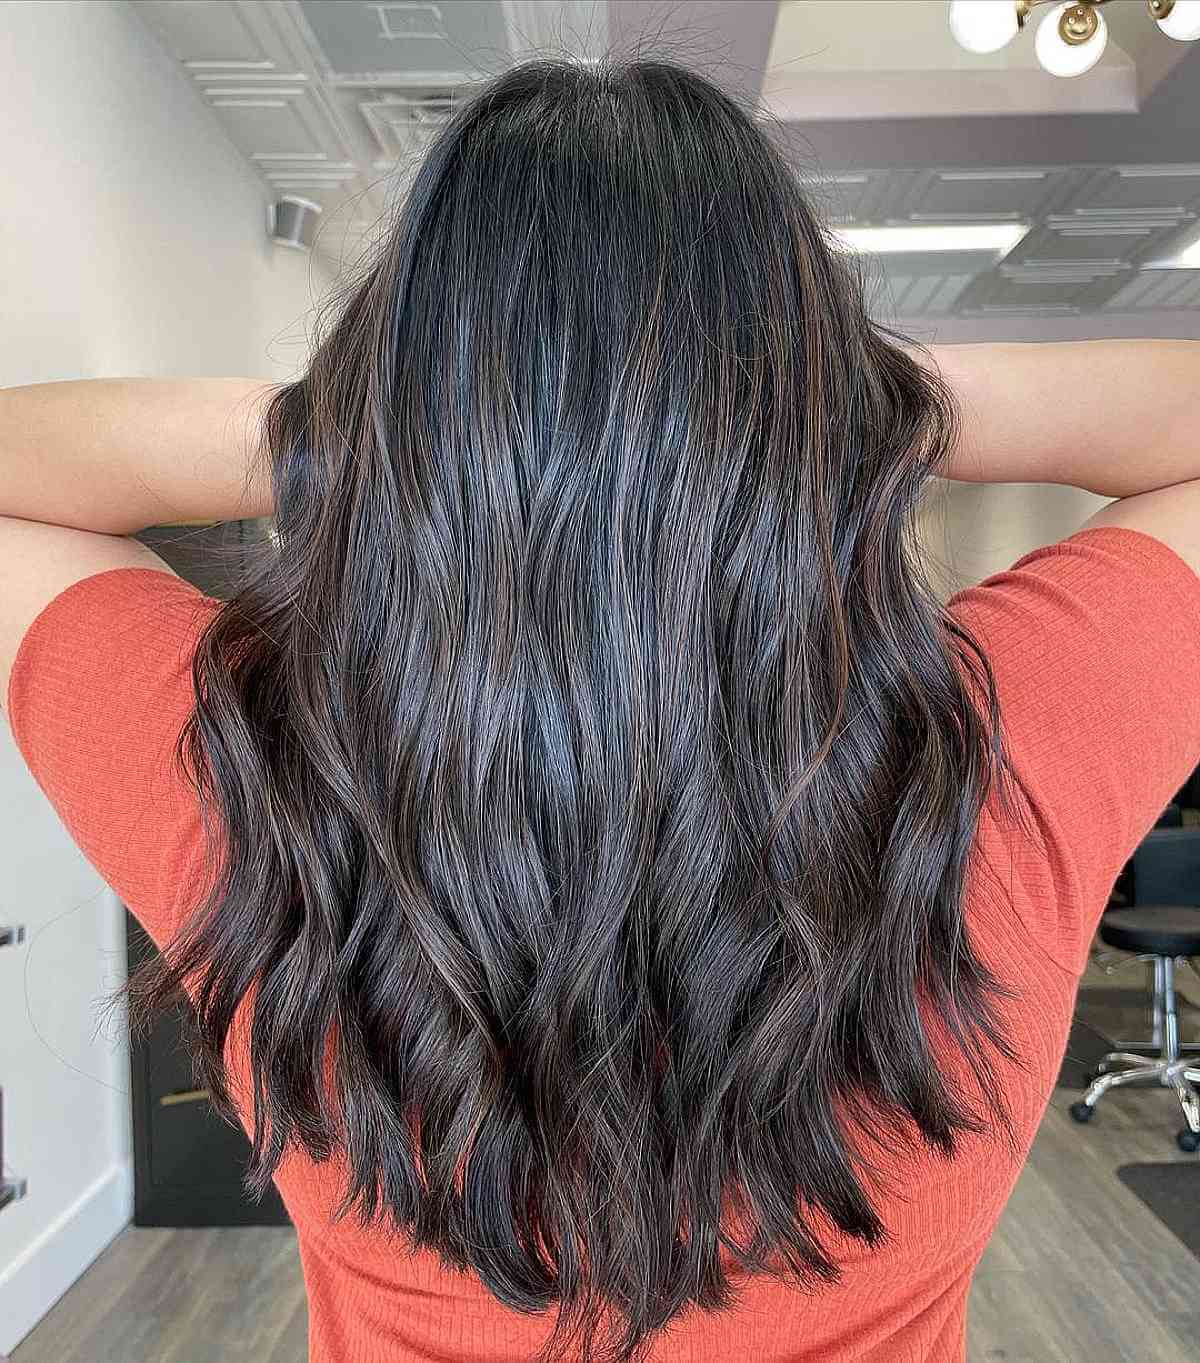 Subtle Highlights and Partial Balayage on Dark Hair